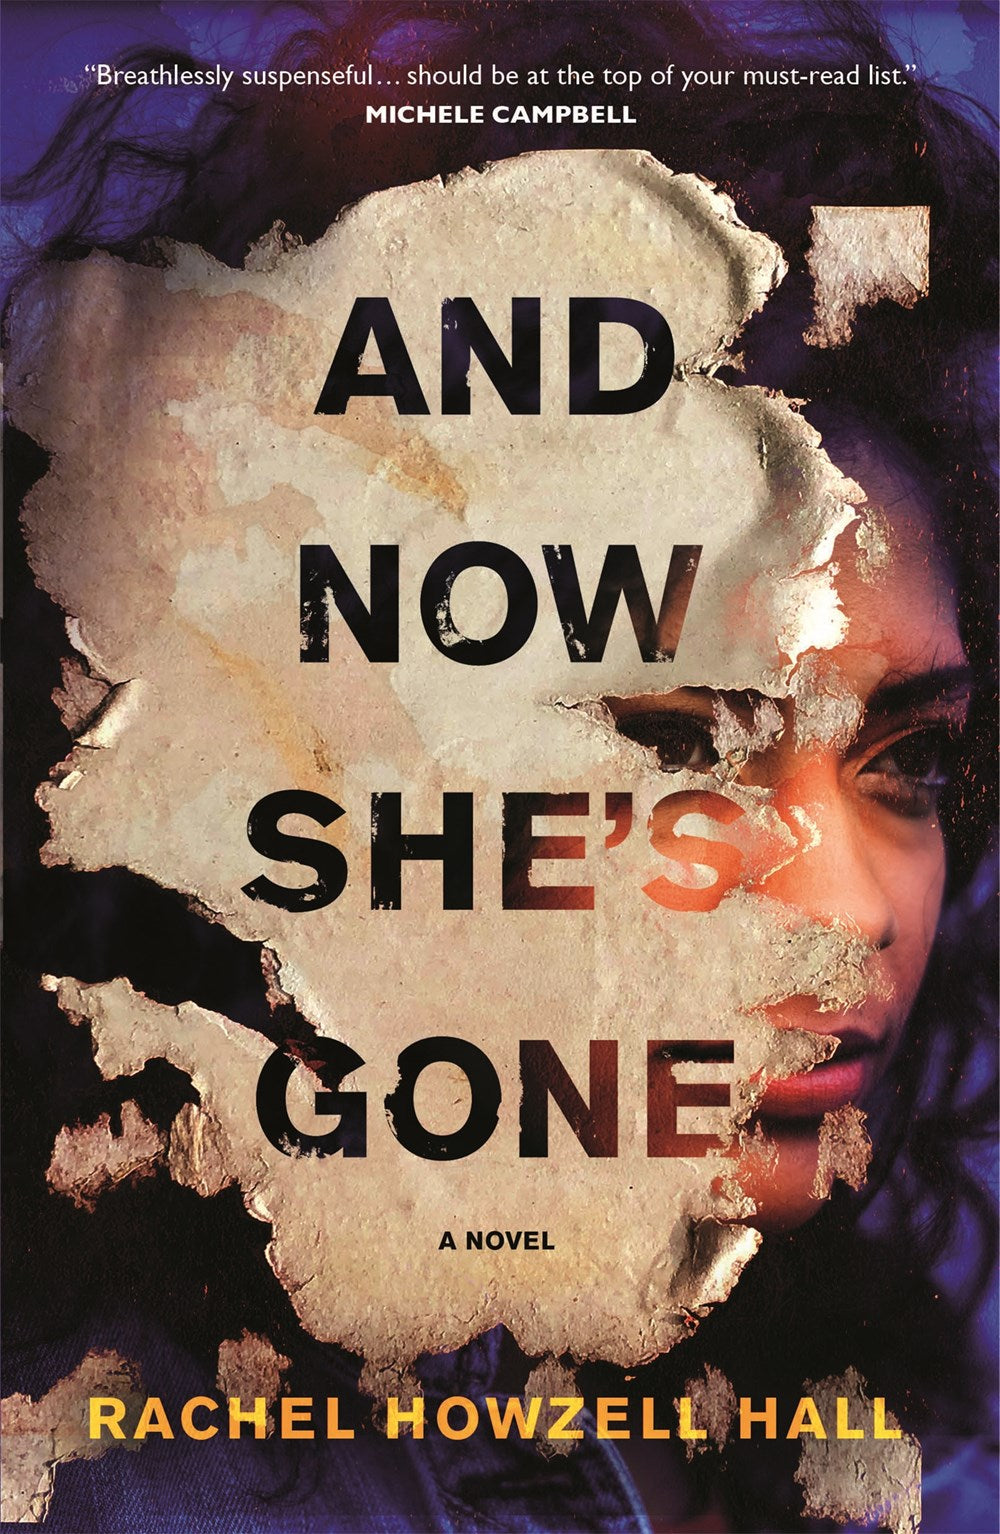 And Now She's Gone by Rachell Howzell Hall, TUma's Books and Things Monthly Book Box October Title